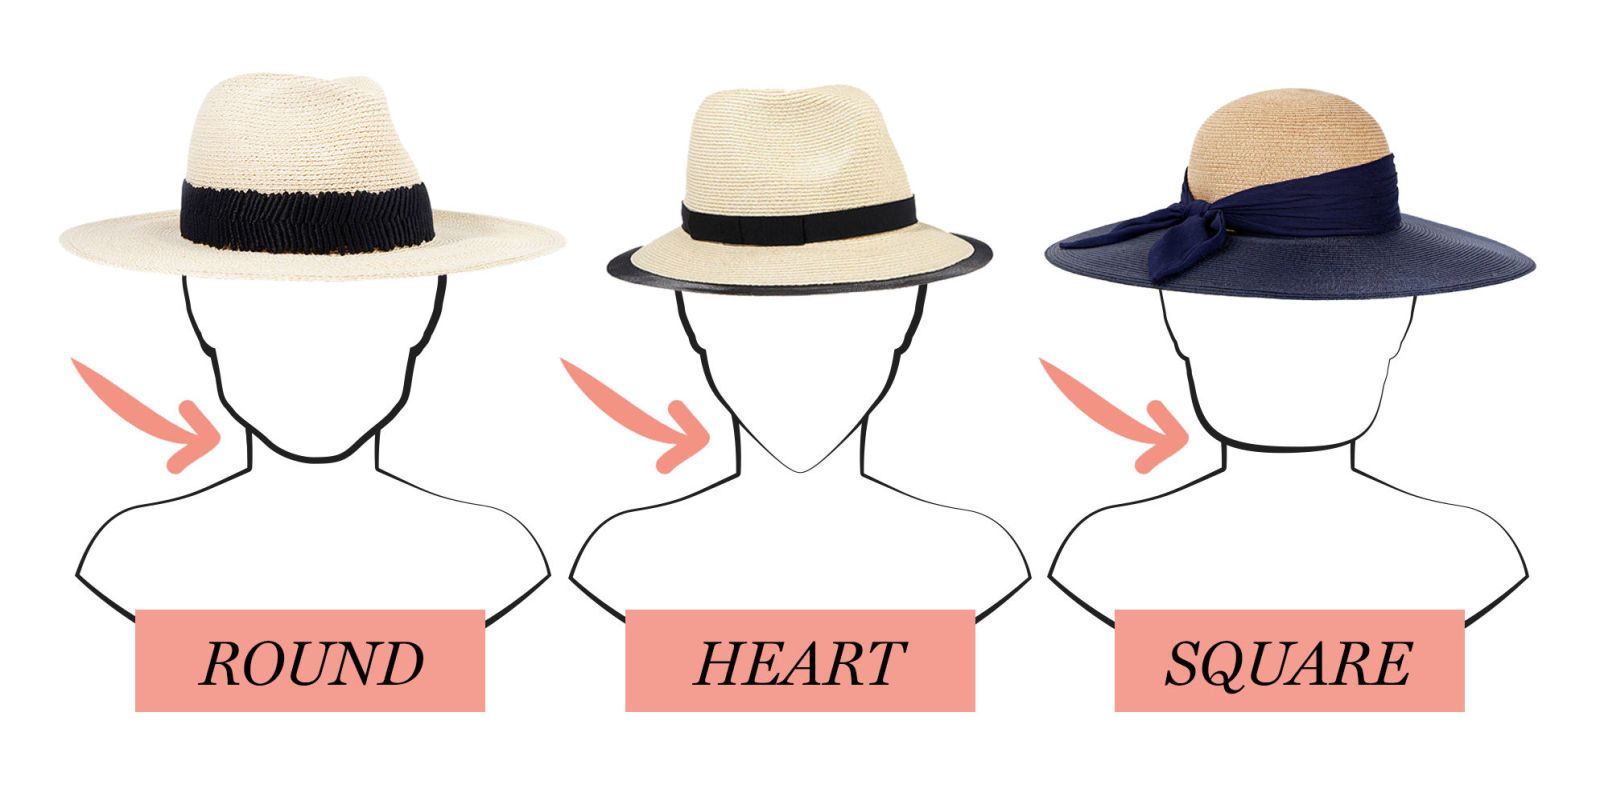 hats for different head shapes